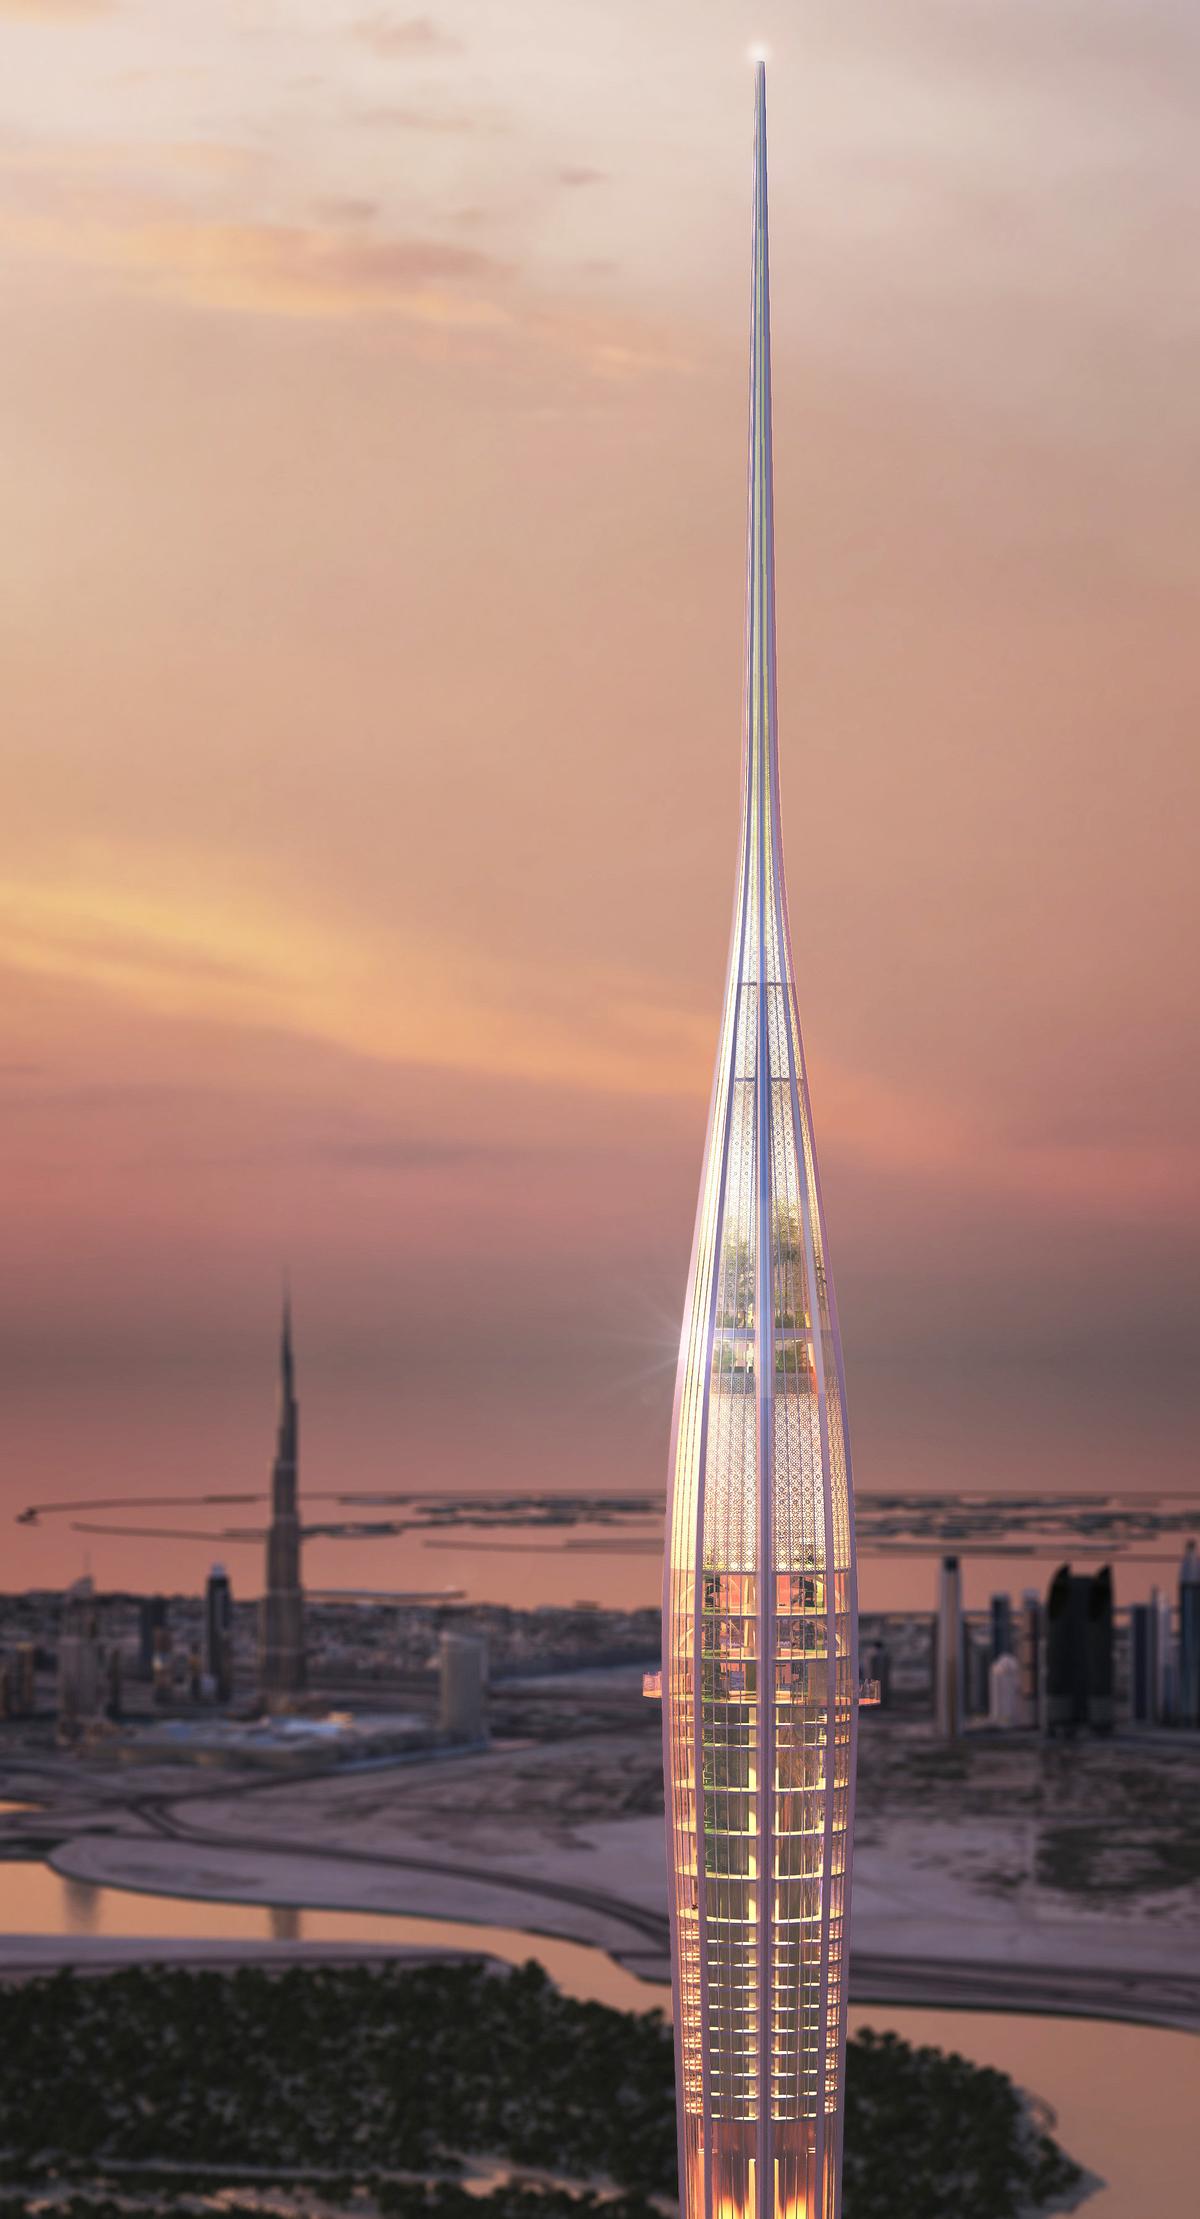 The Tower will be 'a notch' taller than the world's highest building, the Burj Khalifa